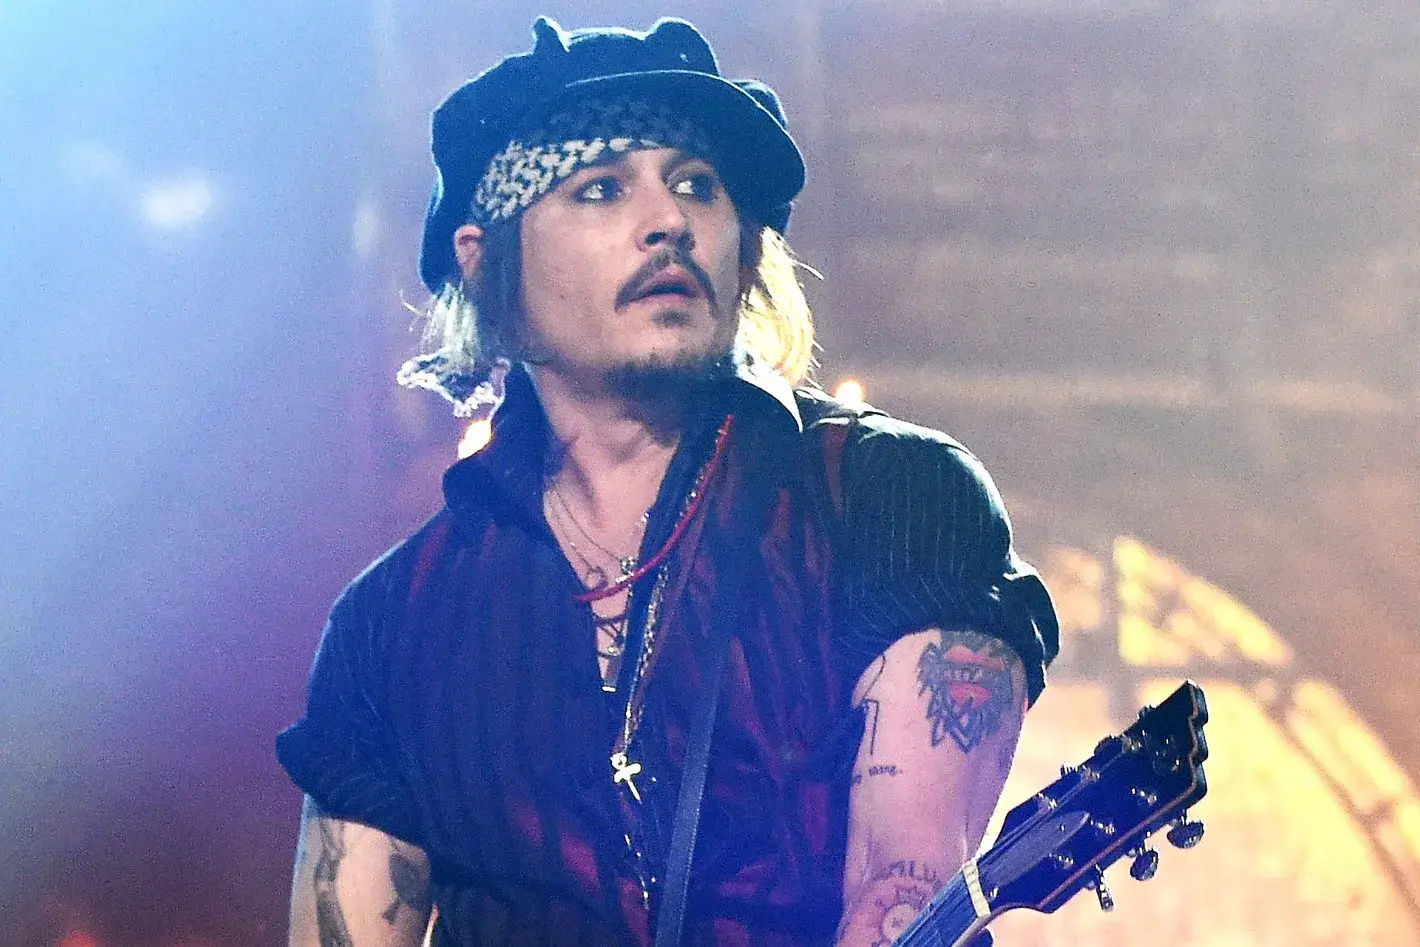 Johnny Depp spotted waving at fans after Rock tour